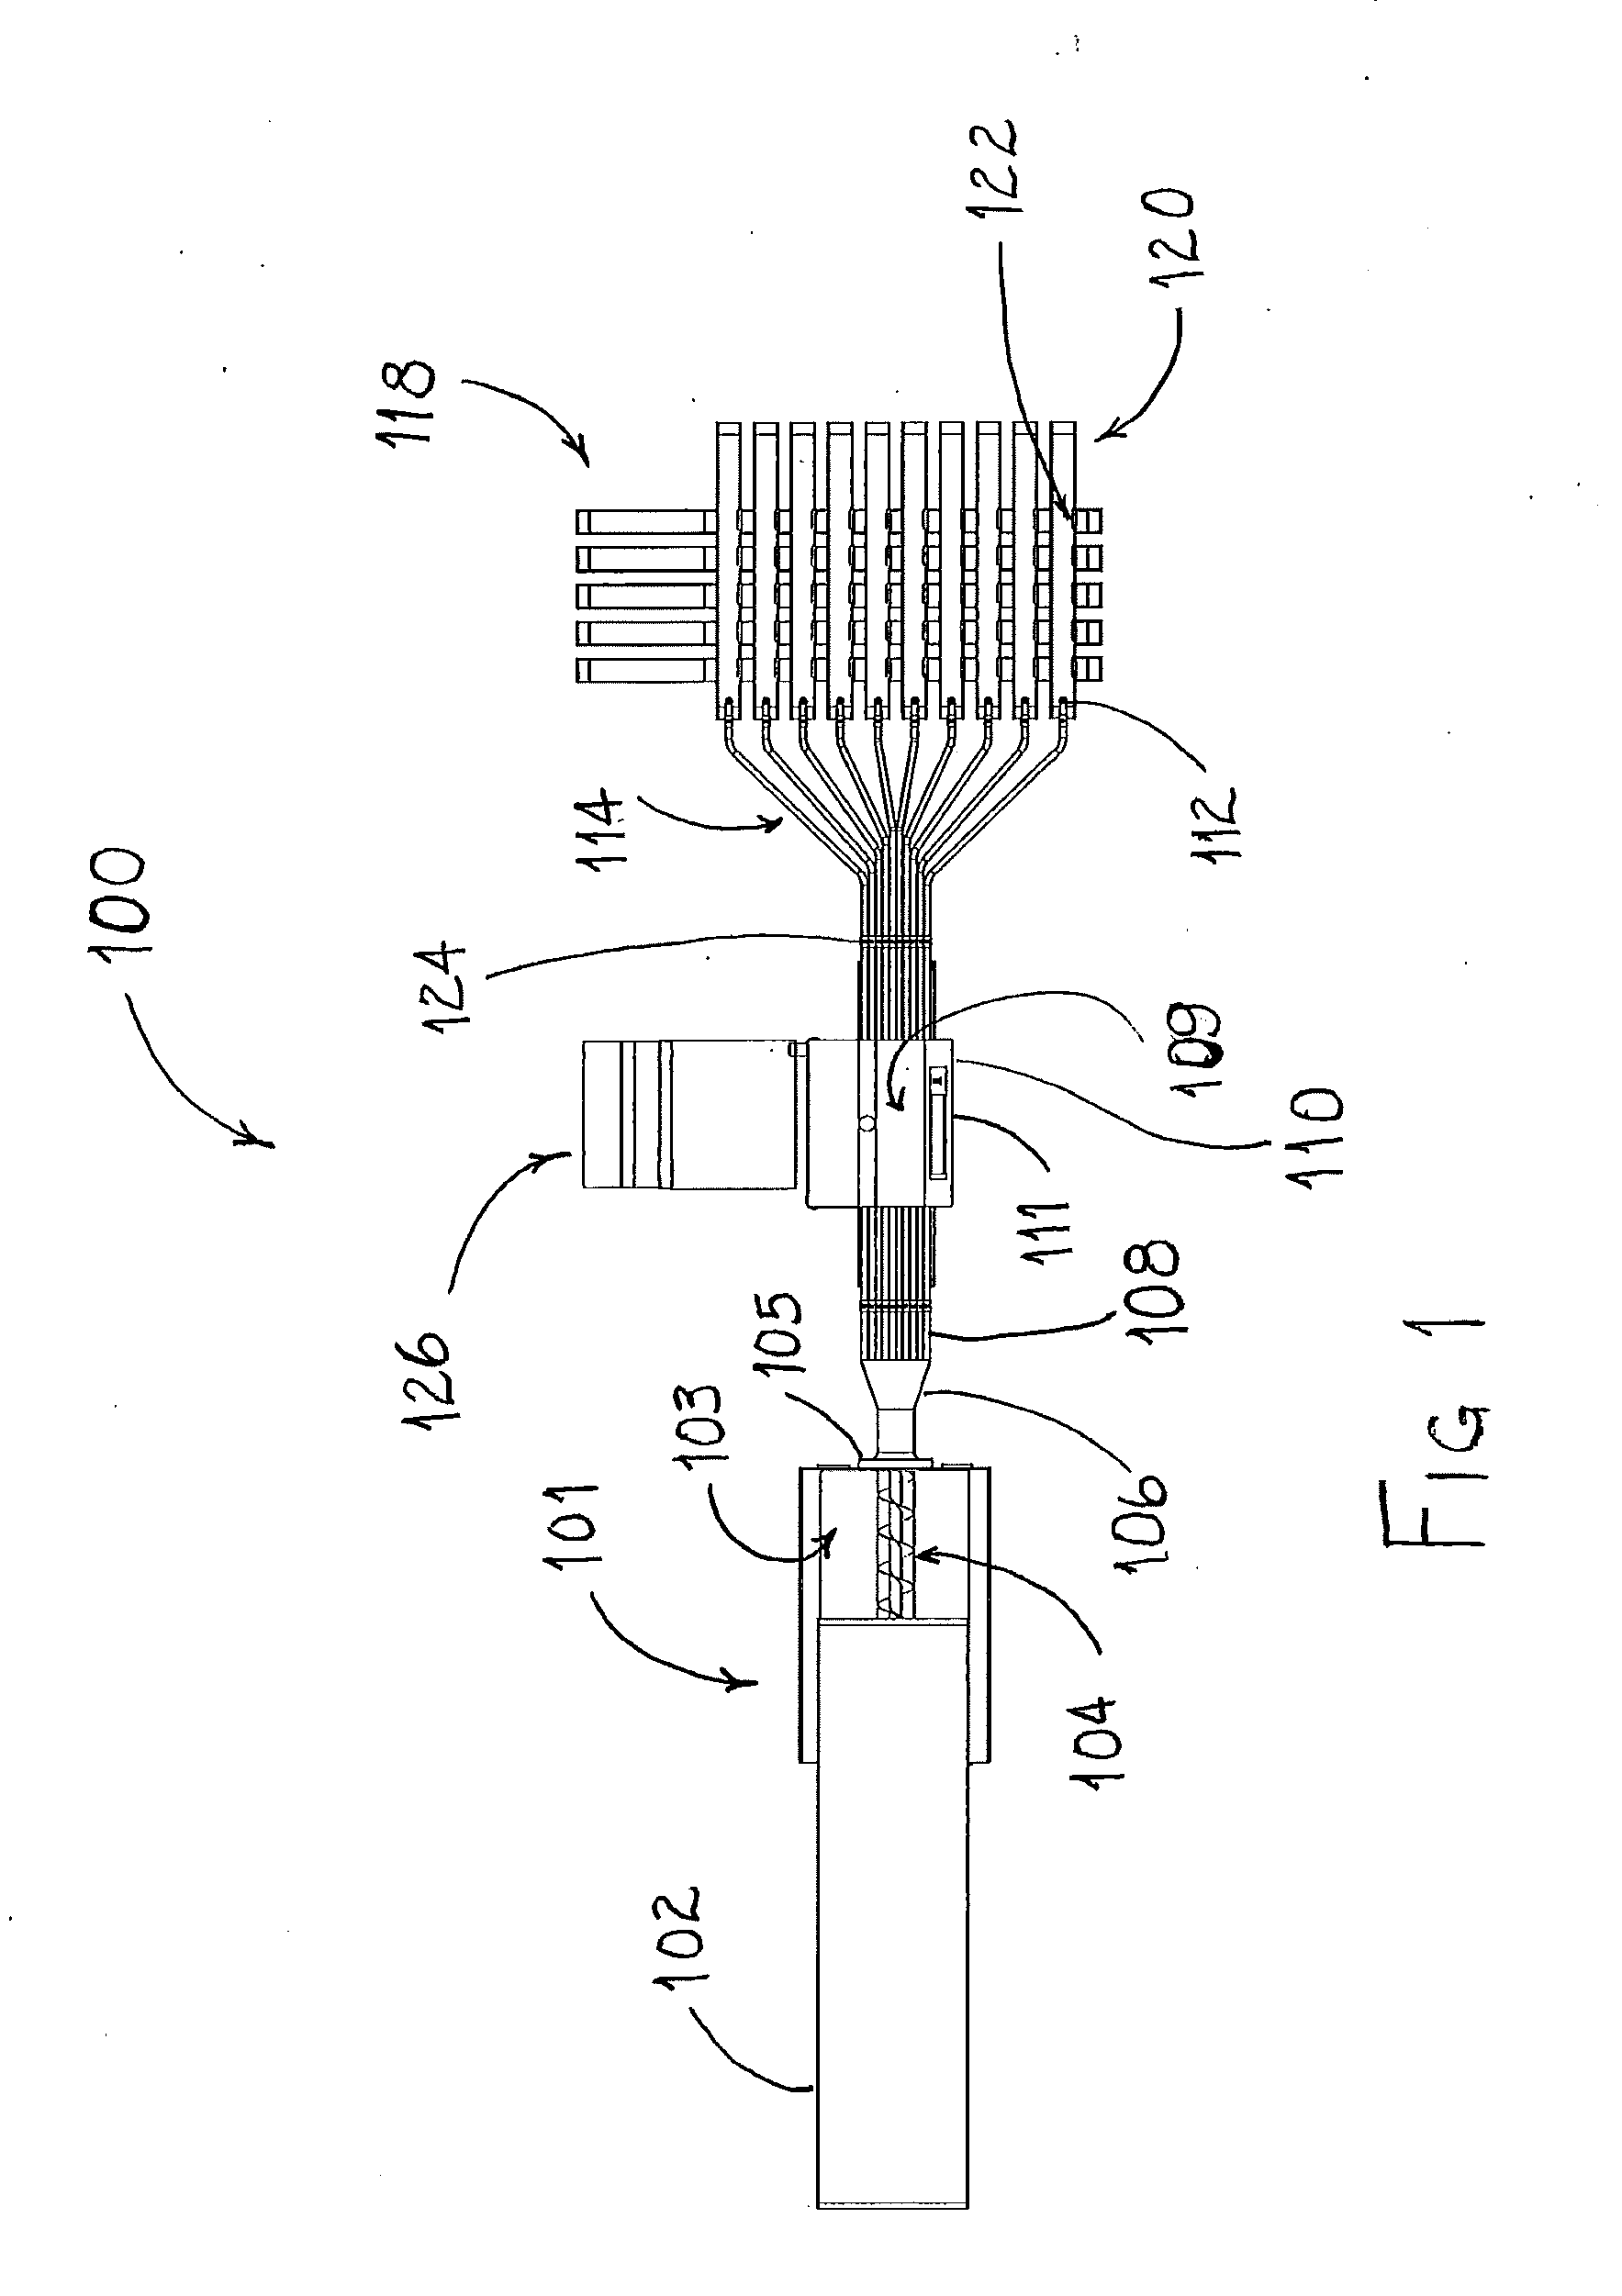 System and method for lean recovery using non invasive sensors